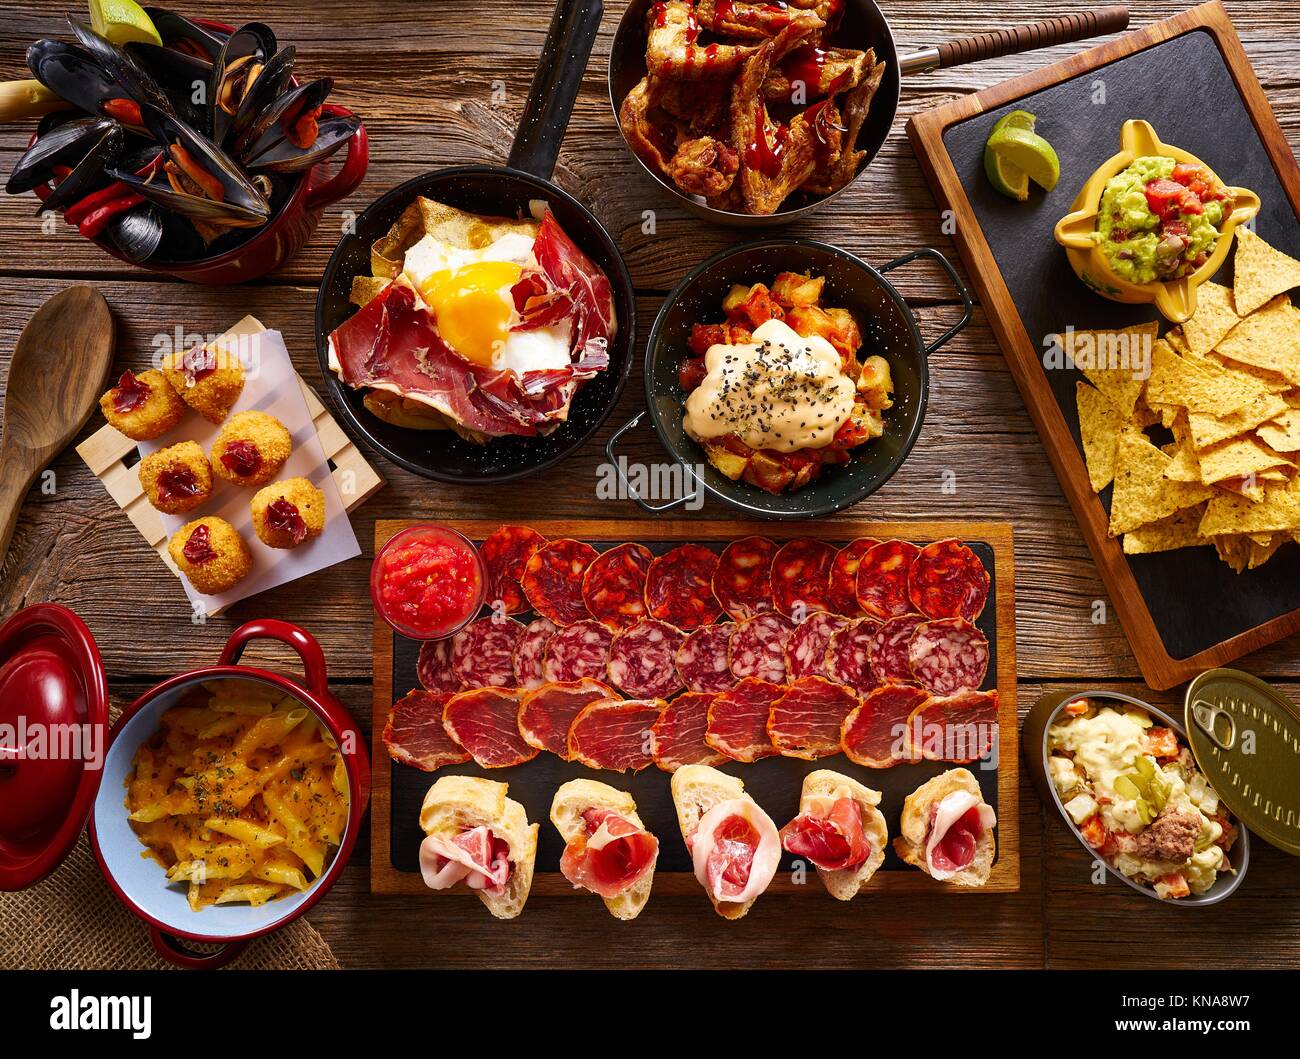 Tapas from Spain varied mix of Mediterranean food recipes. Stock Photo